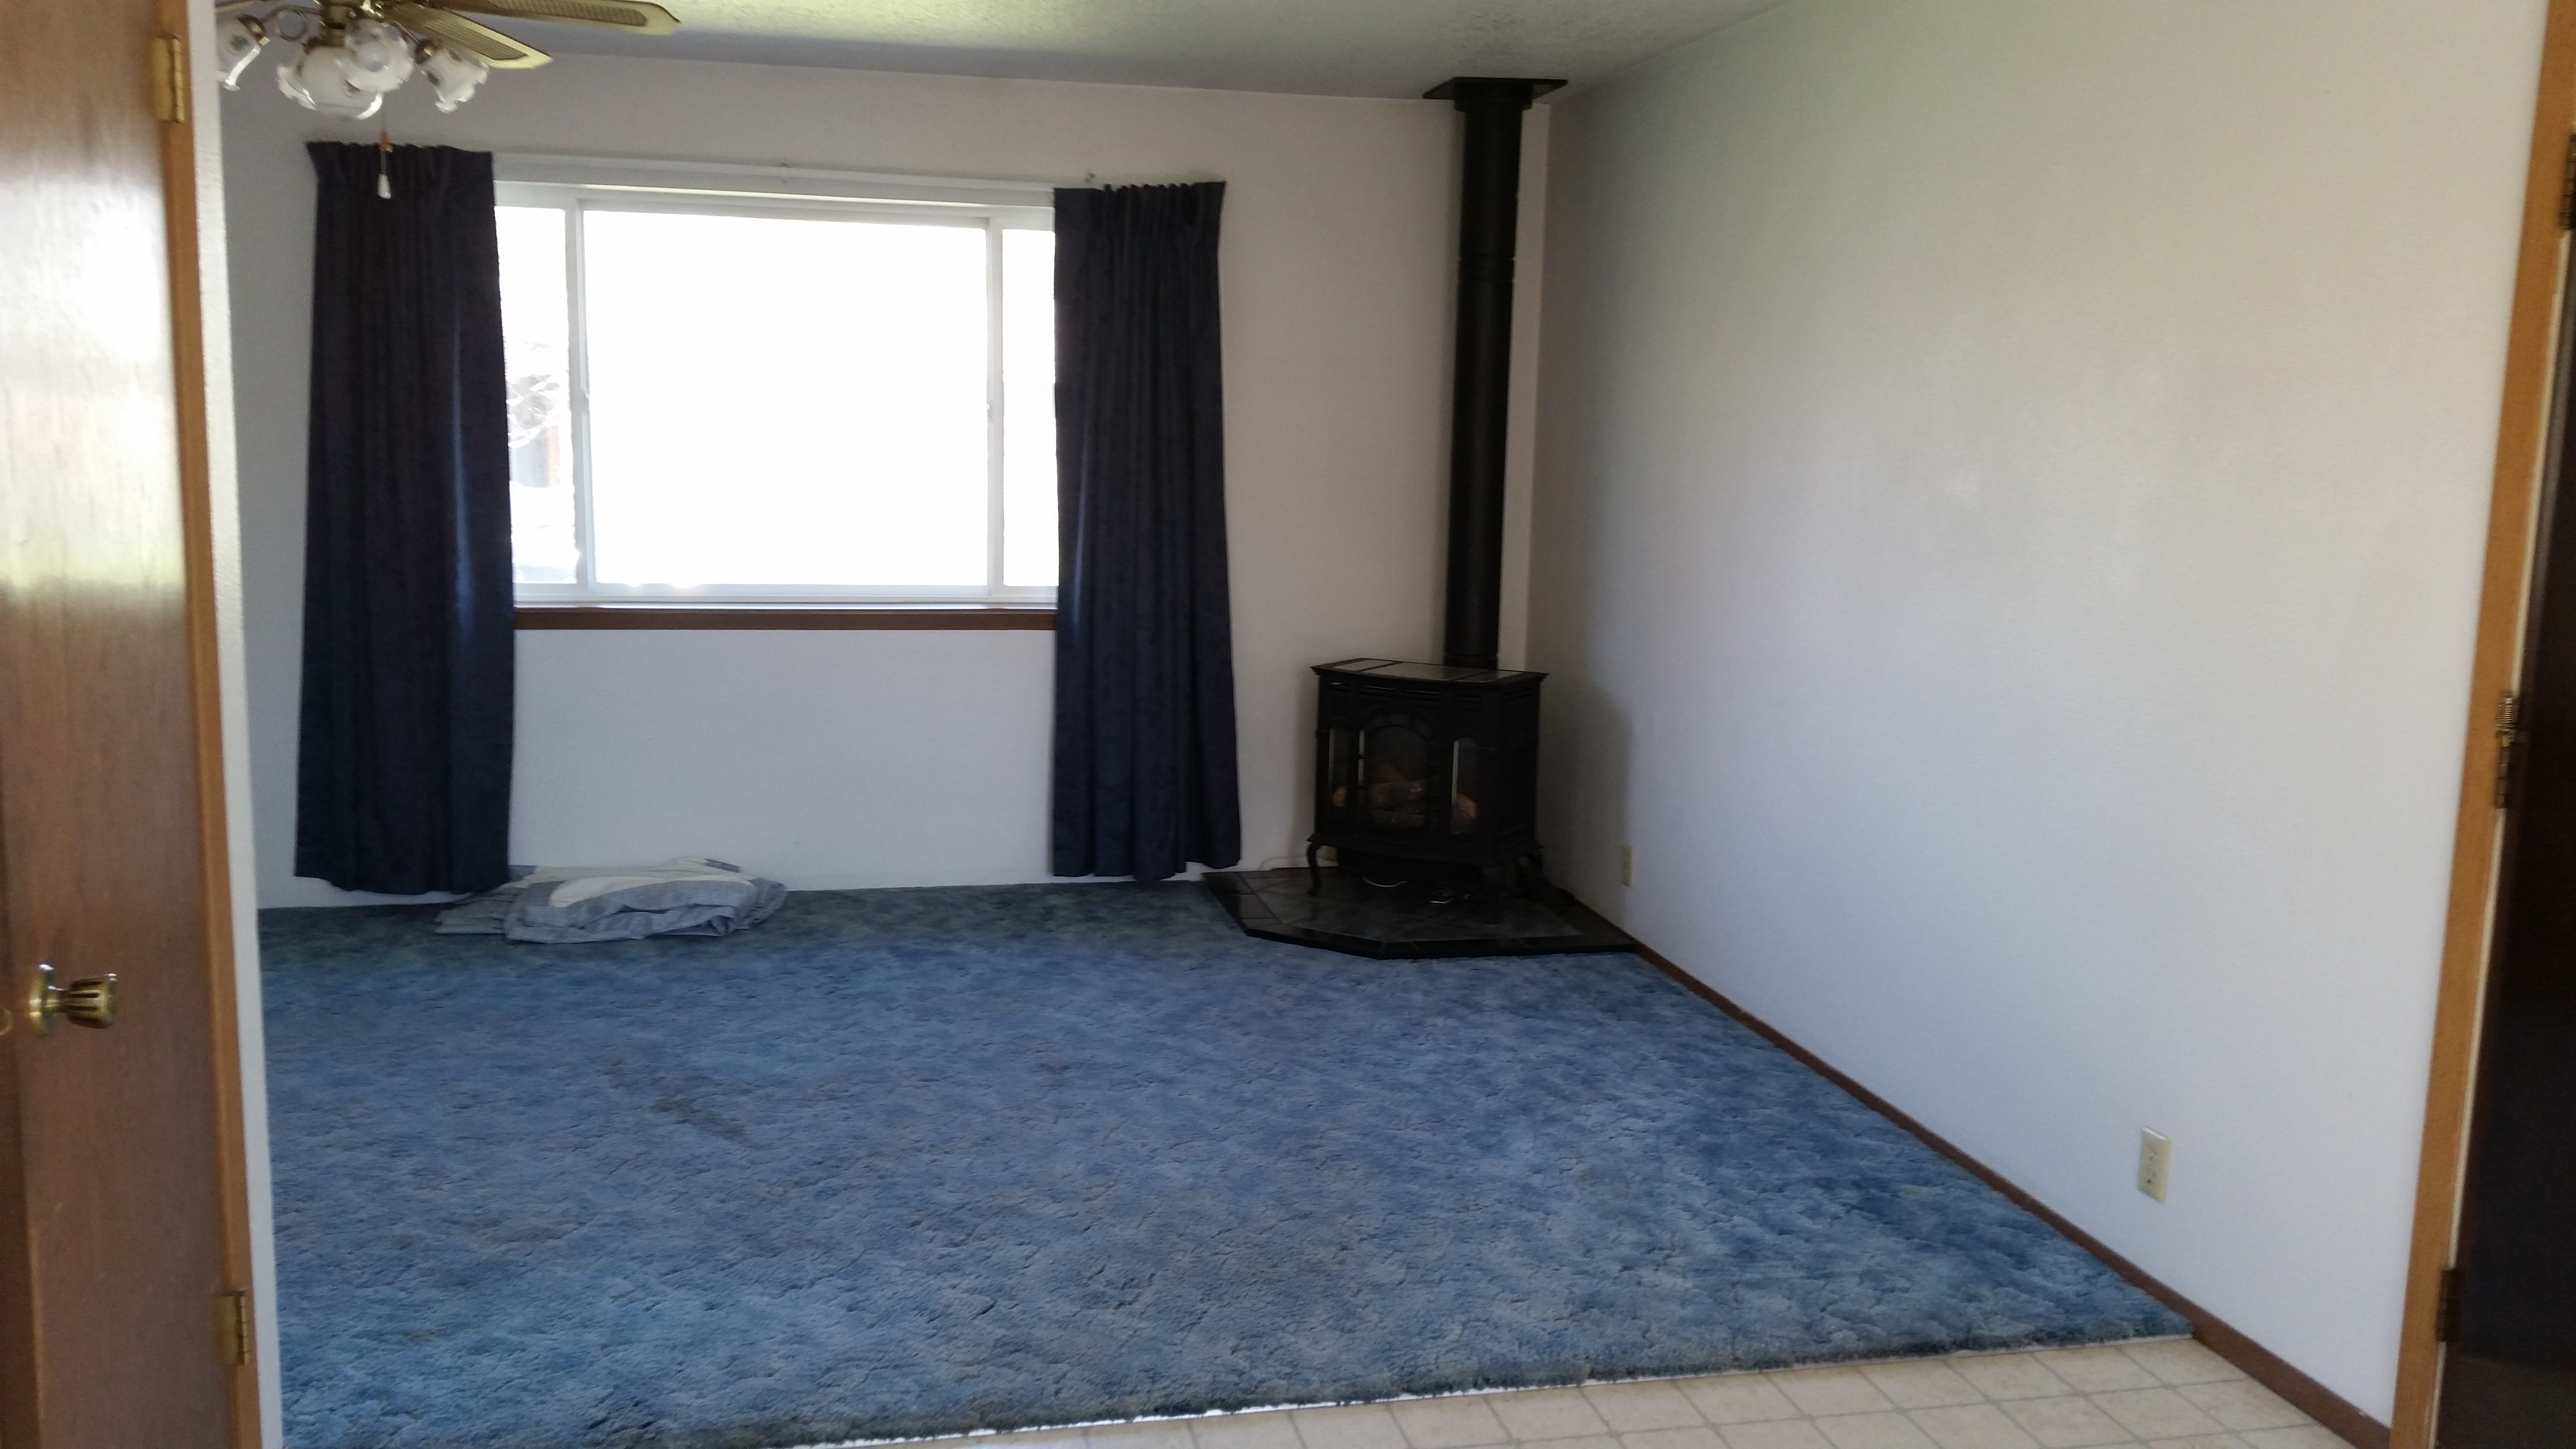 House Remodel – Before